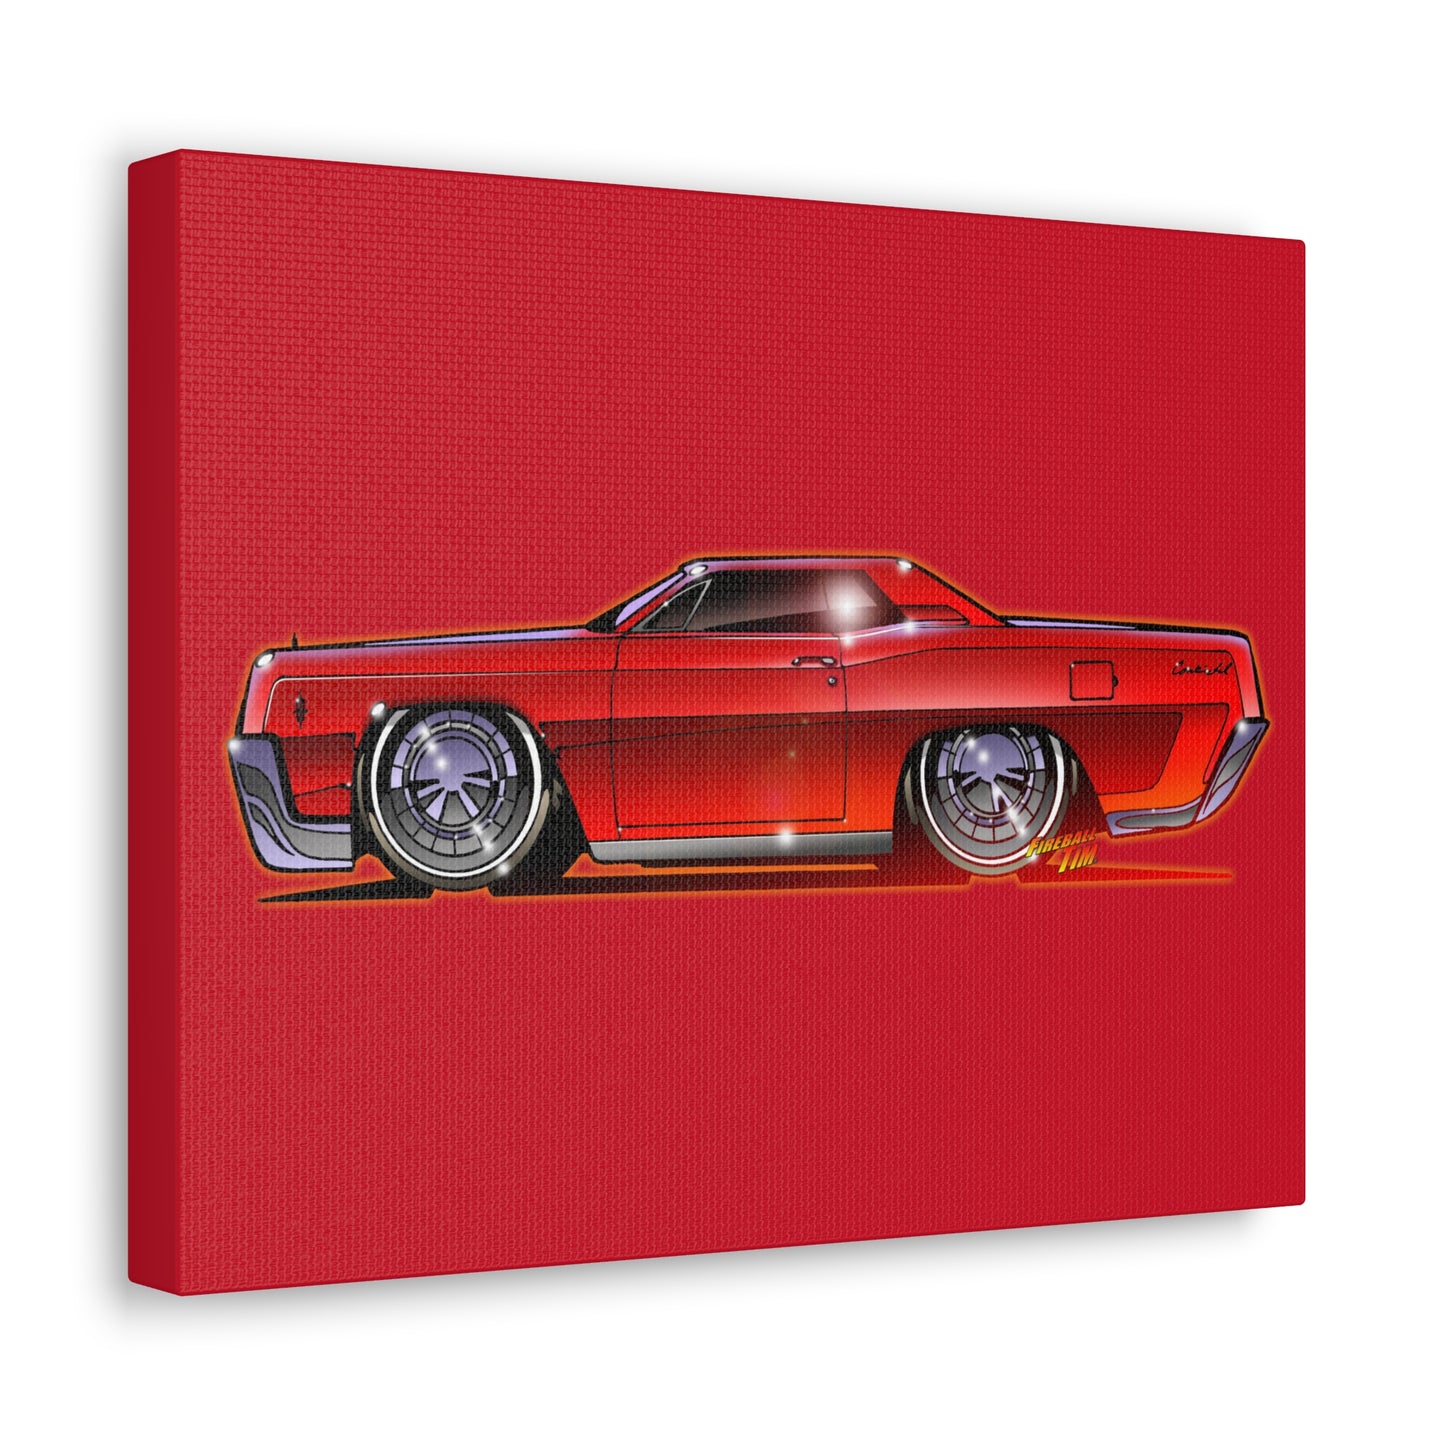 LINCOLN CONTINENTAL COUPE 1967 Canvas Gallery Art Print 11x14